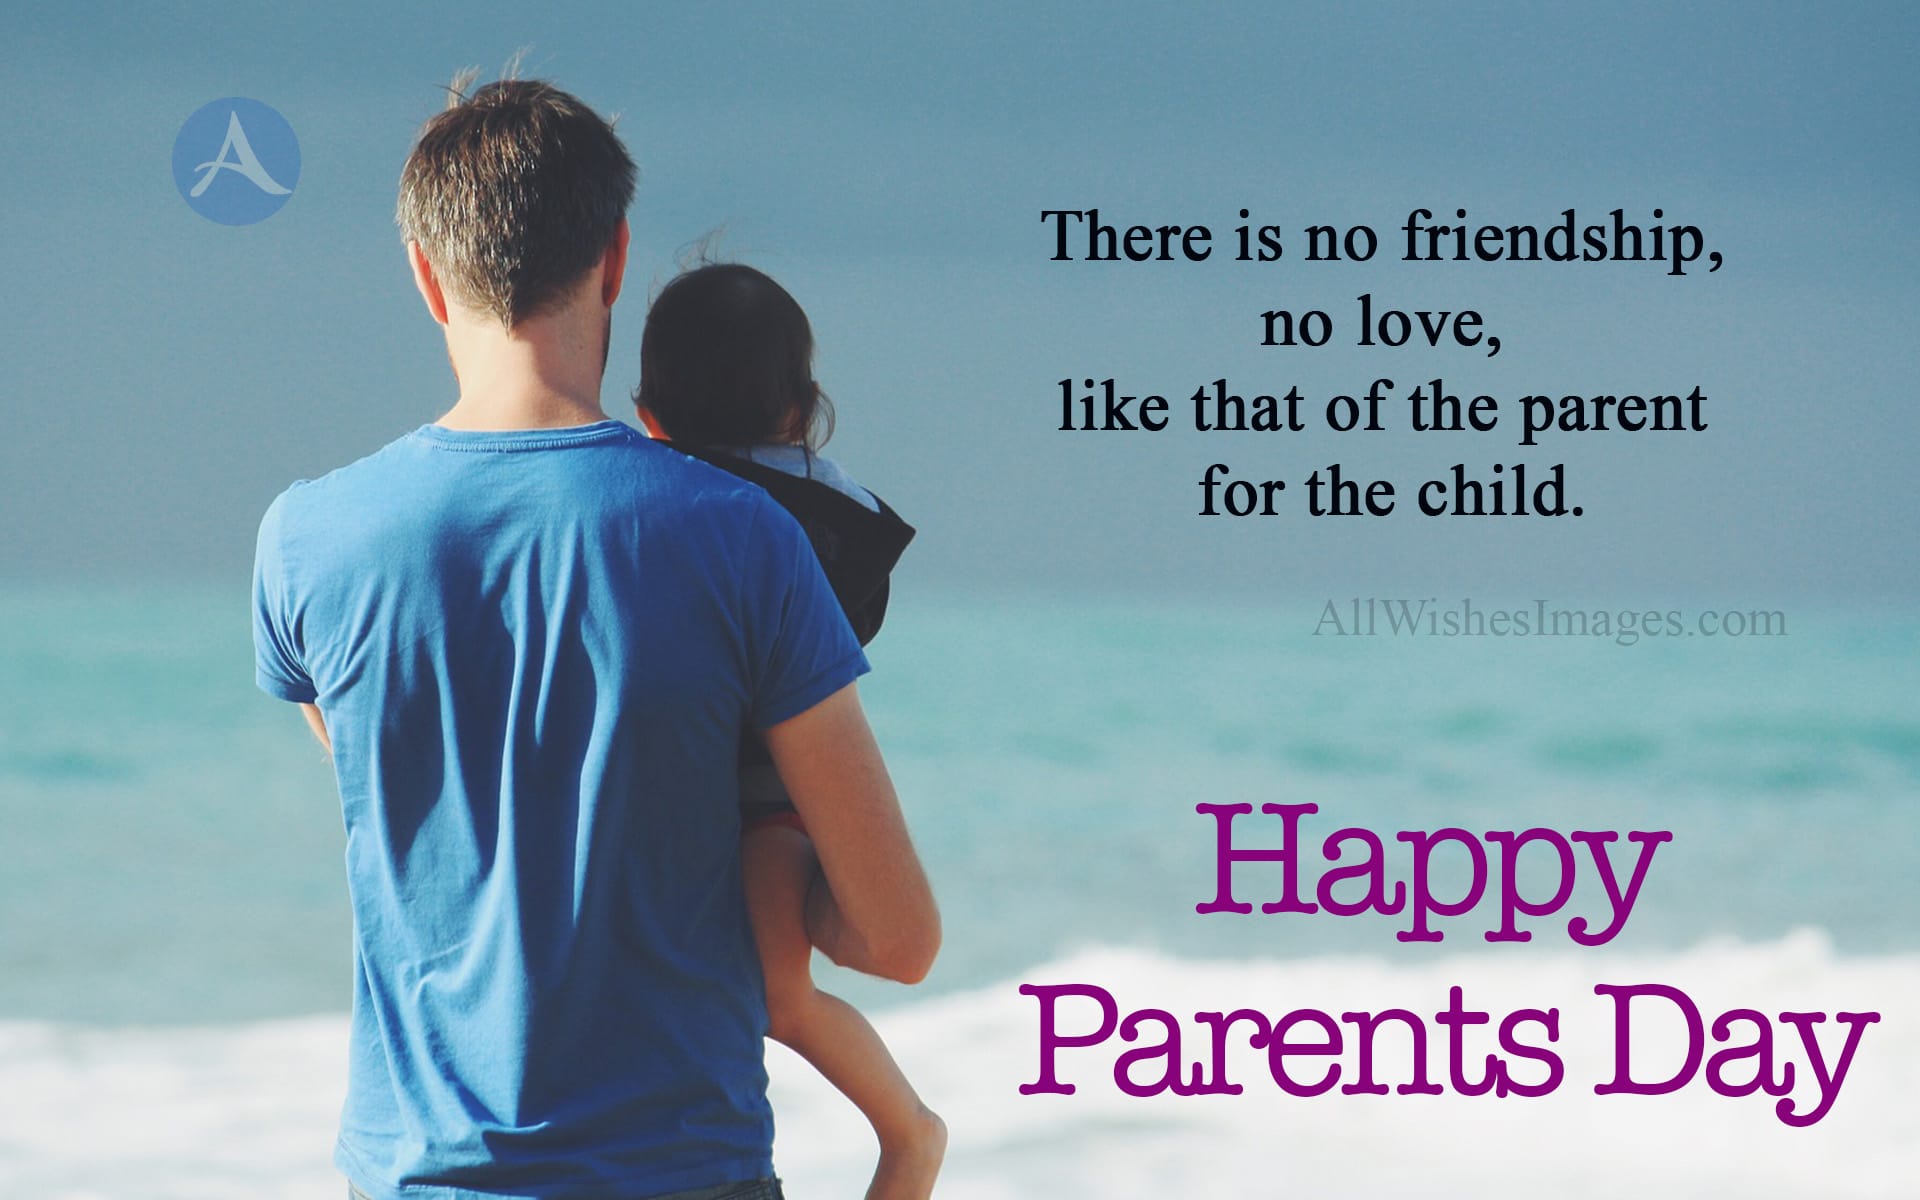 parents day quotes in english - All Wishes Images - Images for WhatsApp